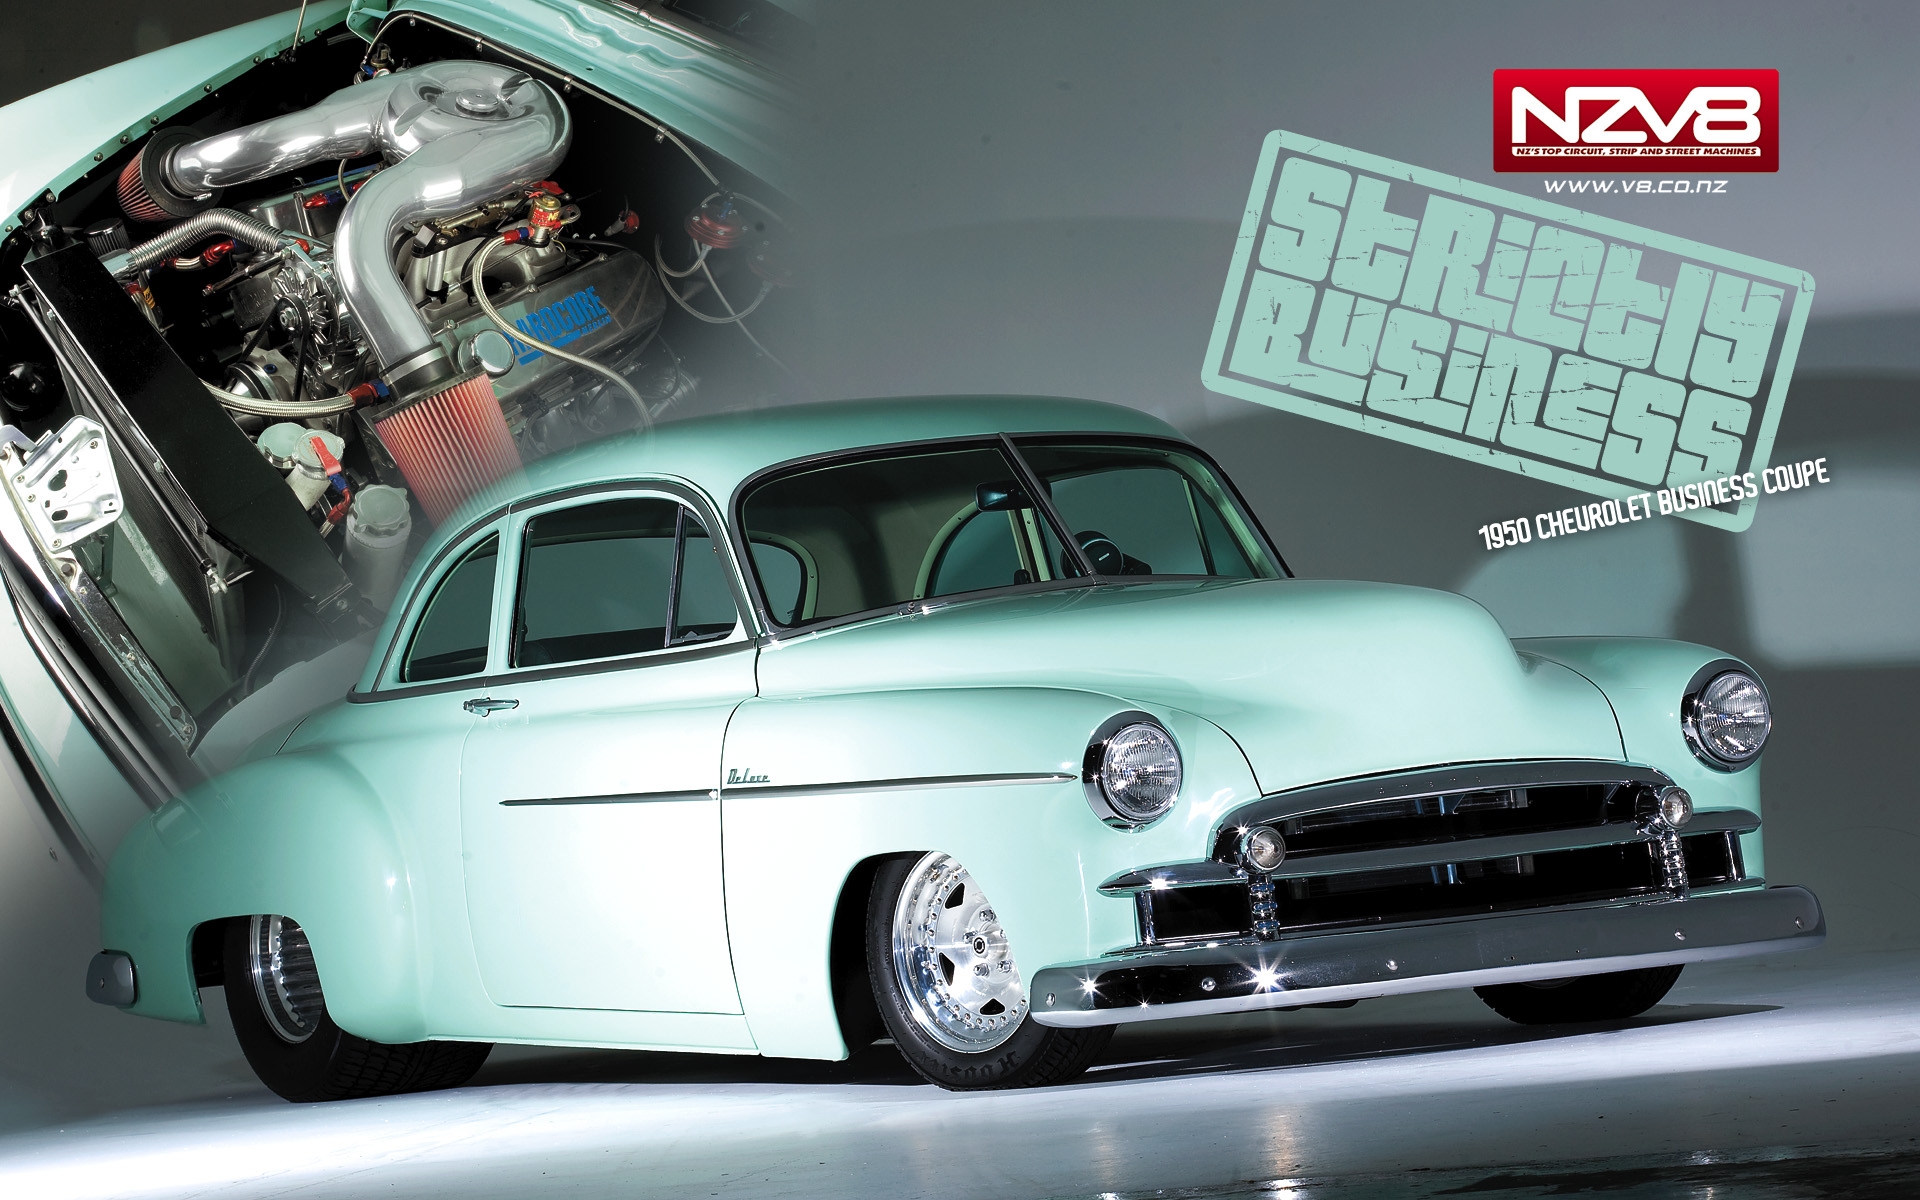 1950 Chevy Coupe Hot Rod - HD Wallpaper 